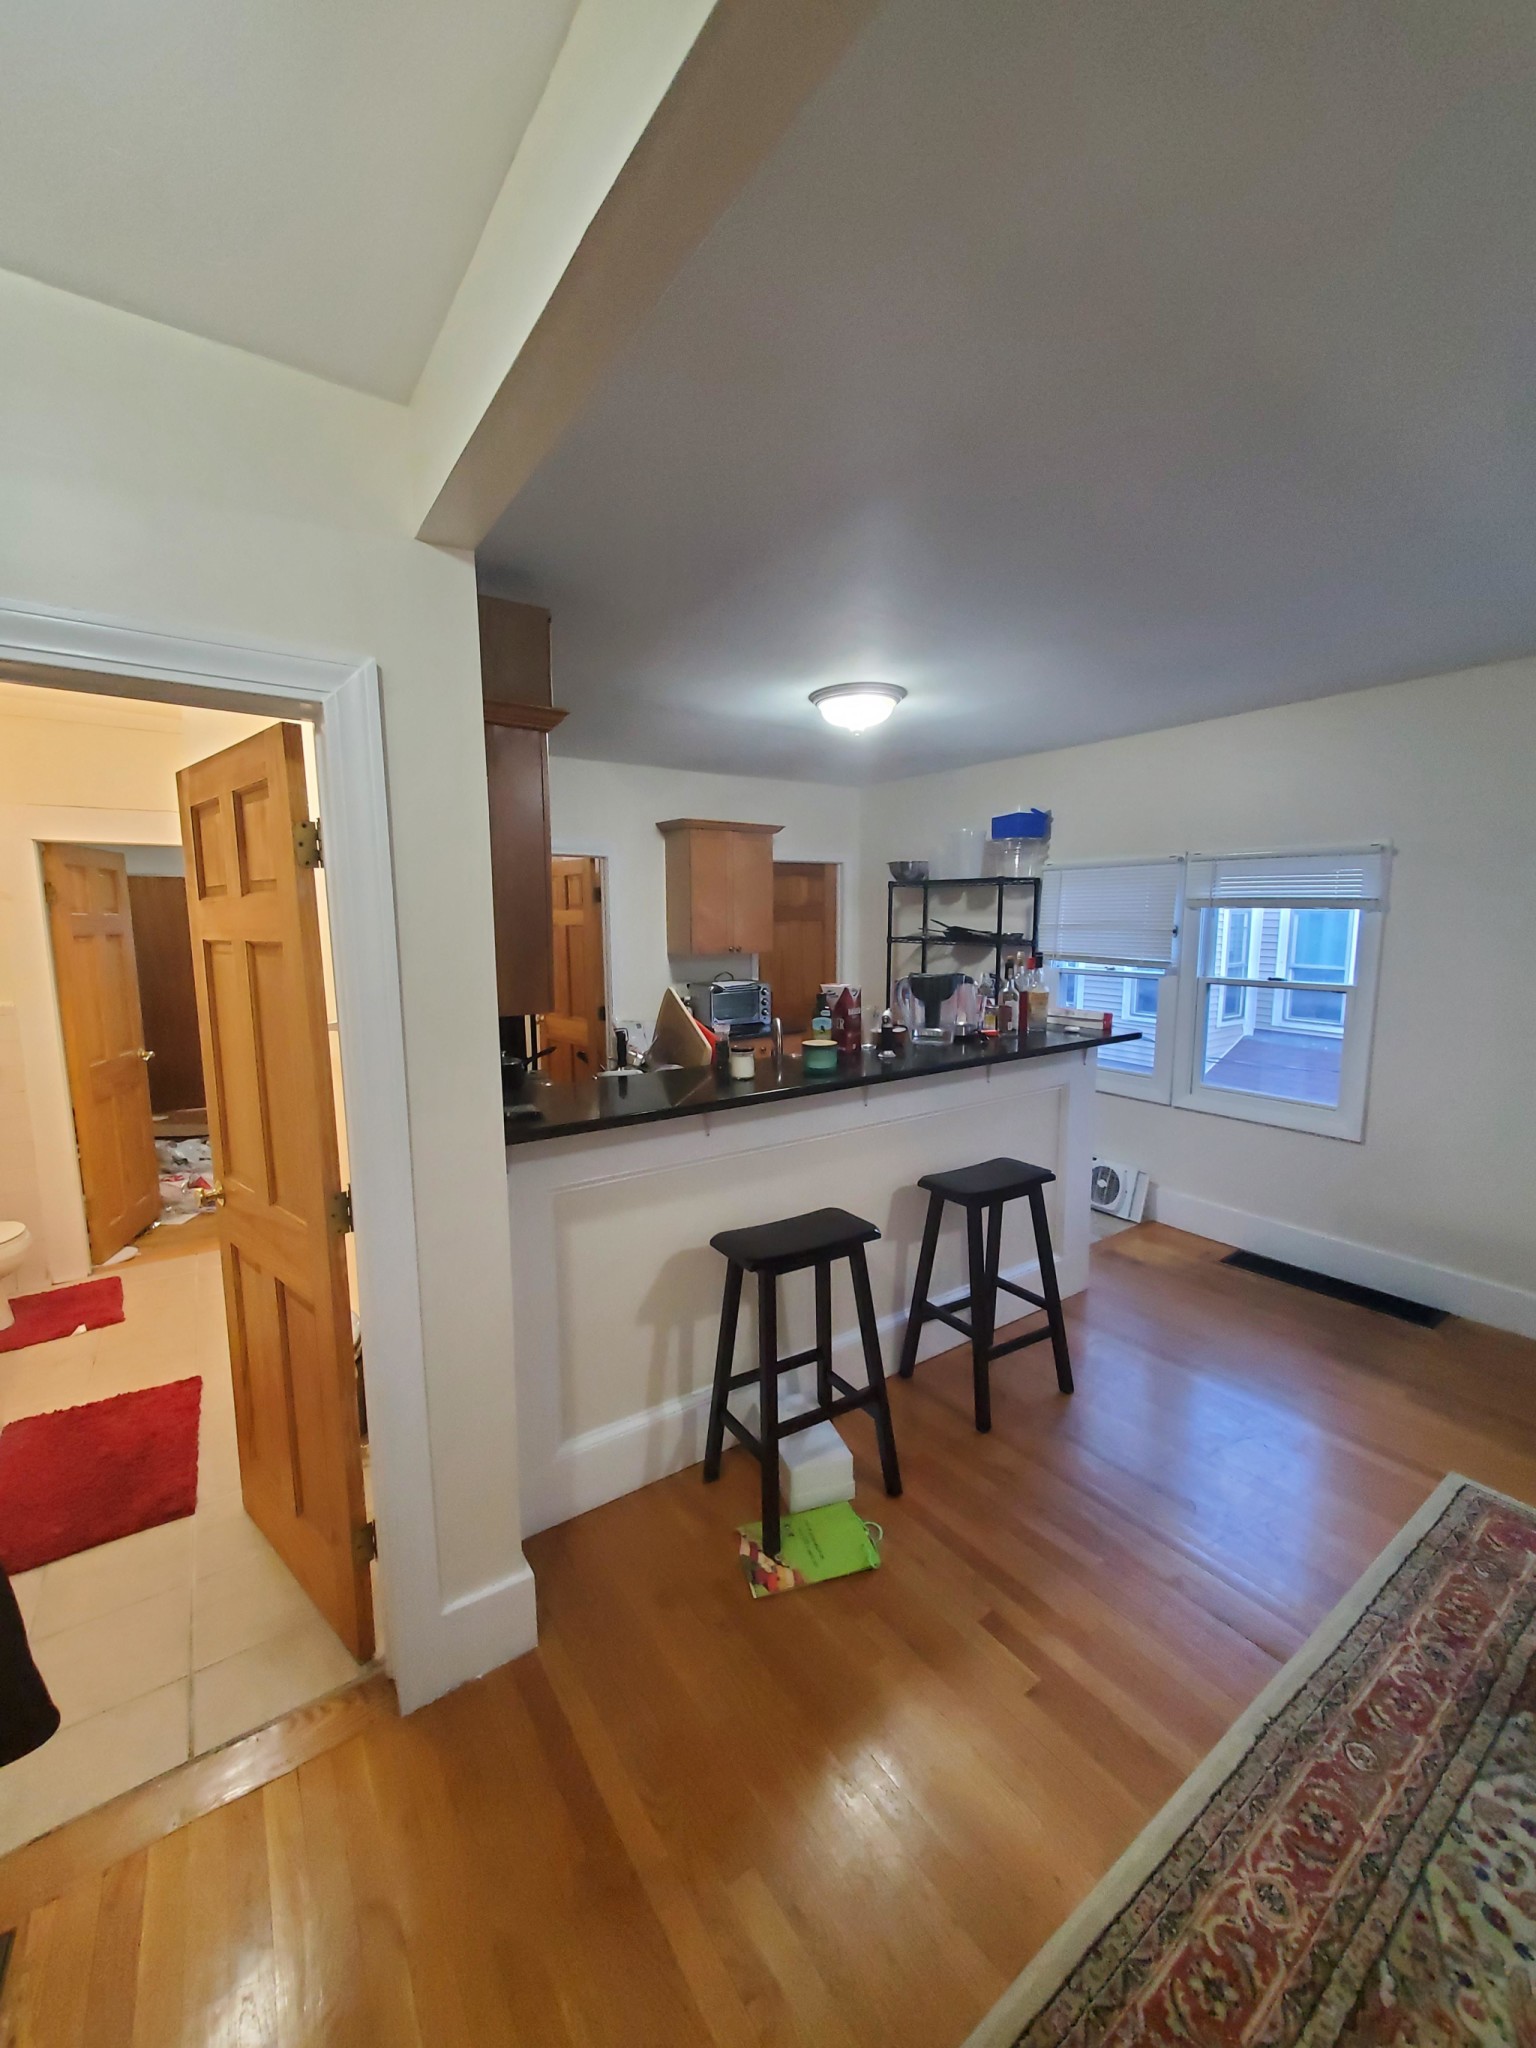 Photos of apartment on Medford,Somerville MA 02143